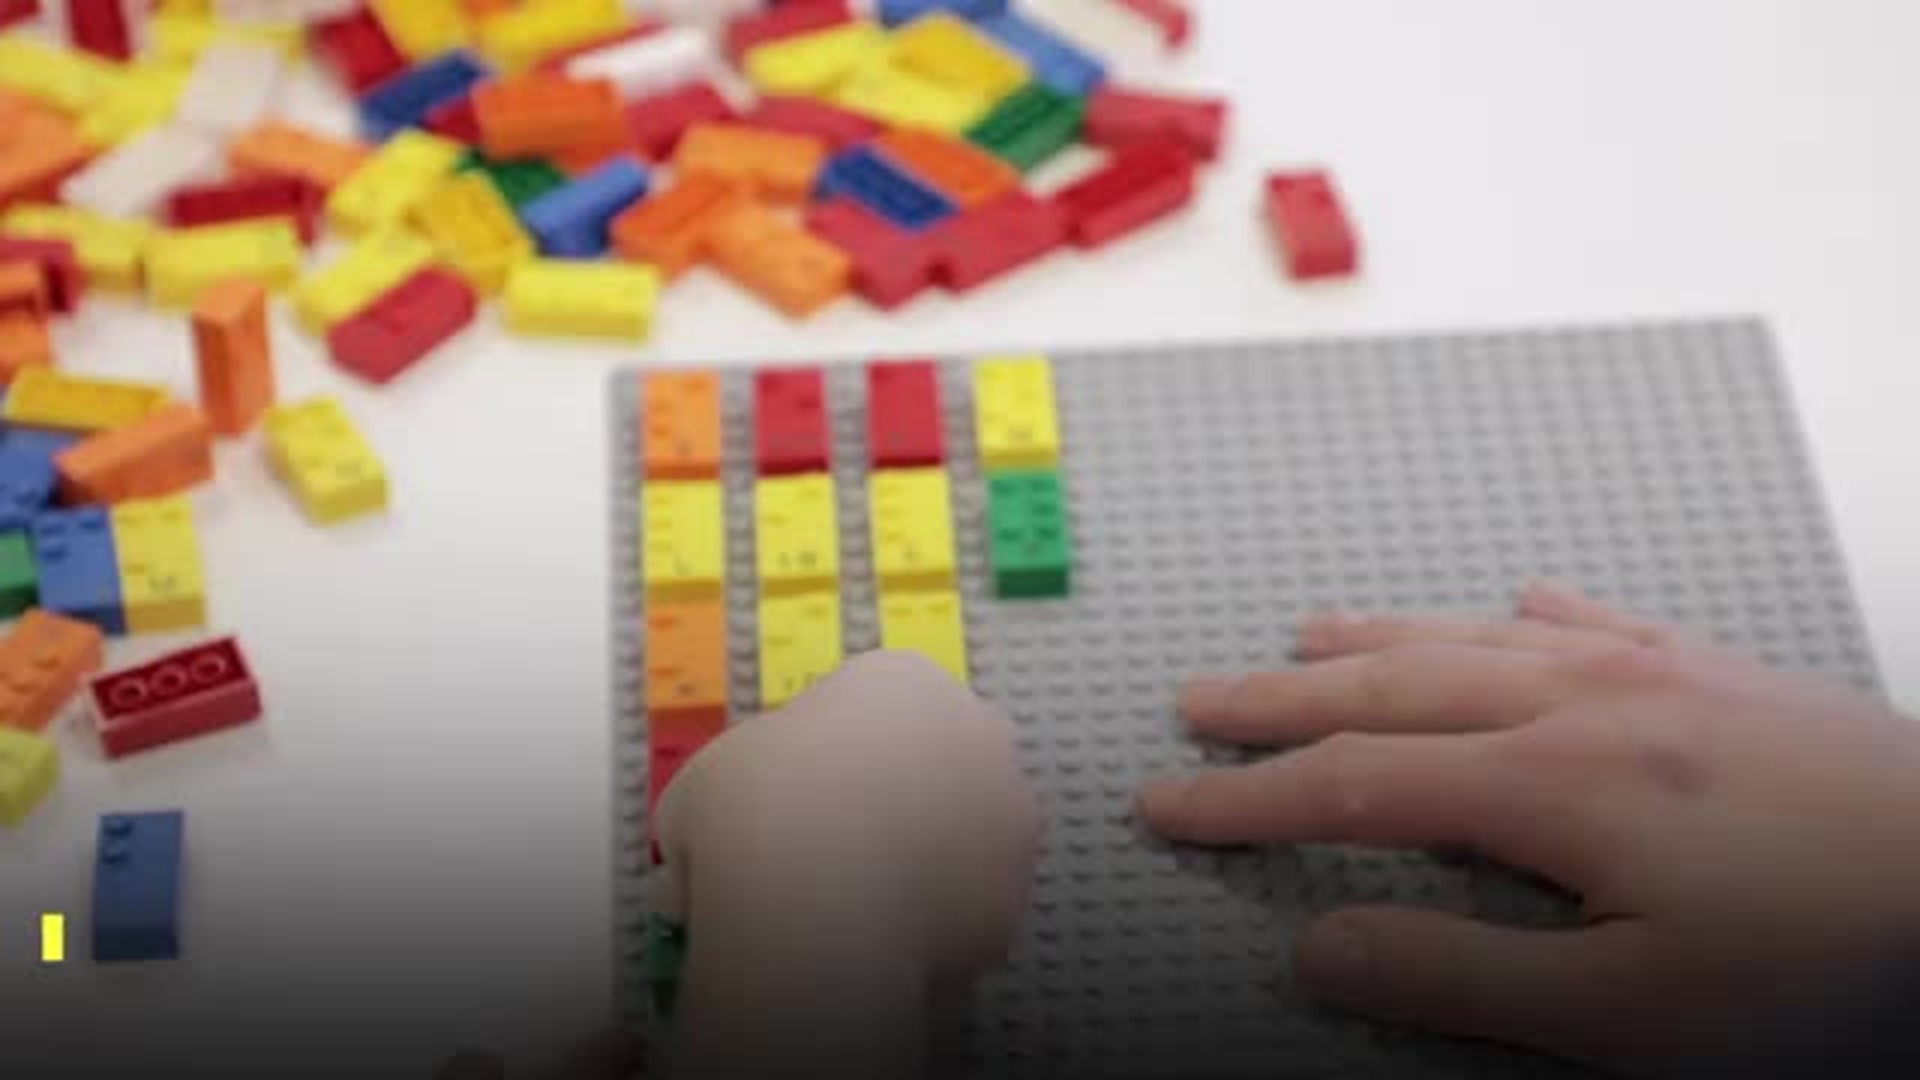 Lego Releases Braille Bricks to Teach Children Who Are Blind, Visually Impaired